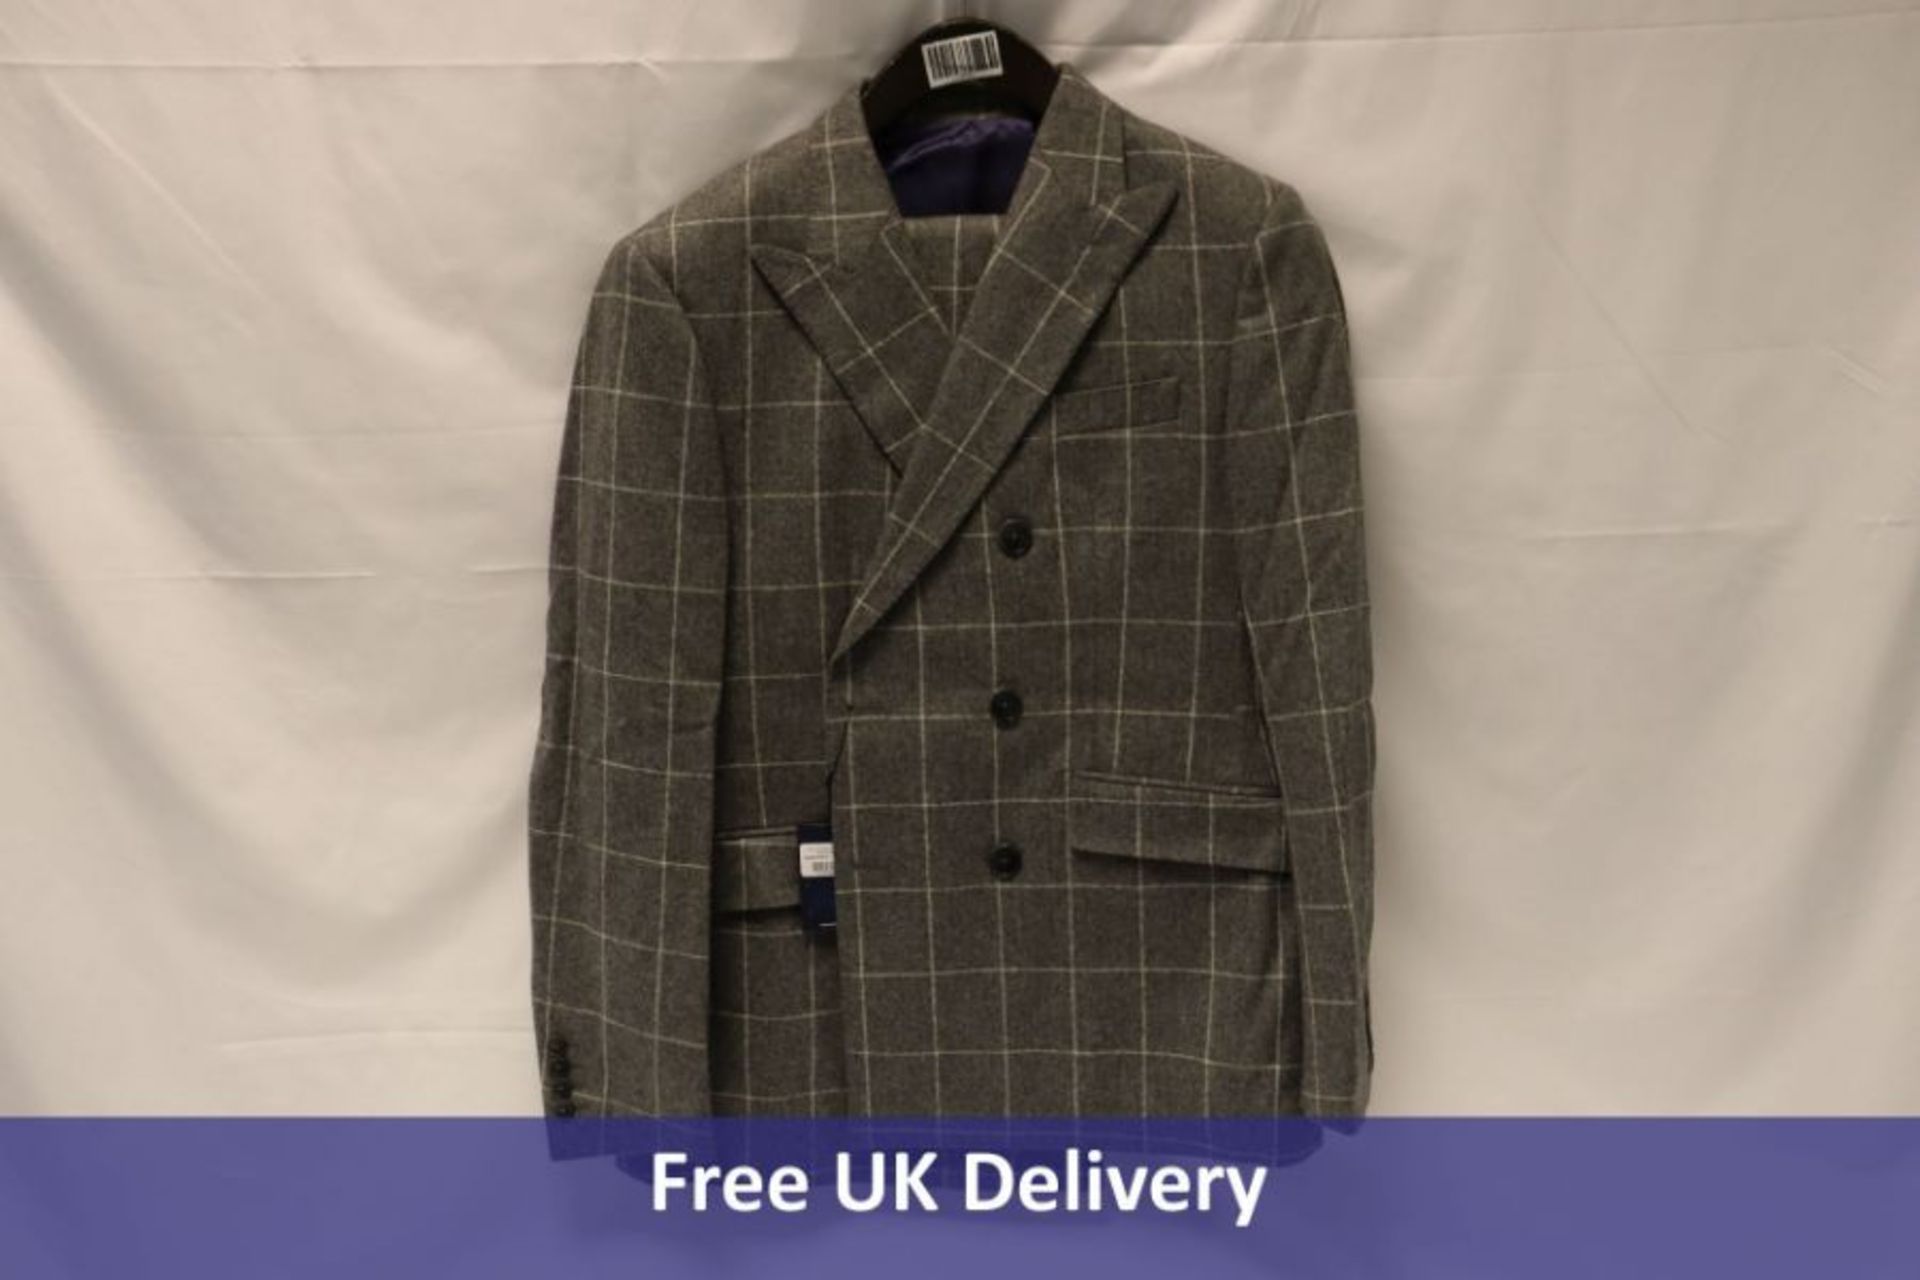 Hackett Suit, Light Grey/White, Jacket Size 42R, Trousers 36R. No lengths given. New with tags in su